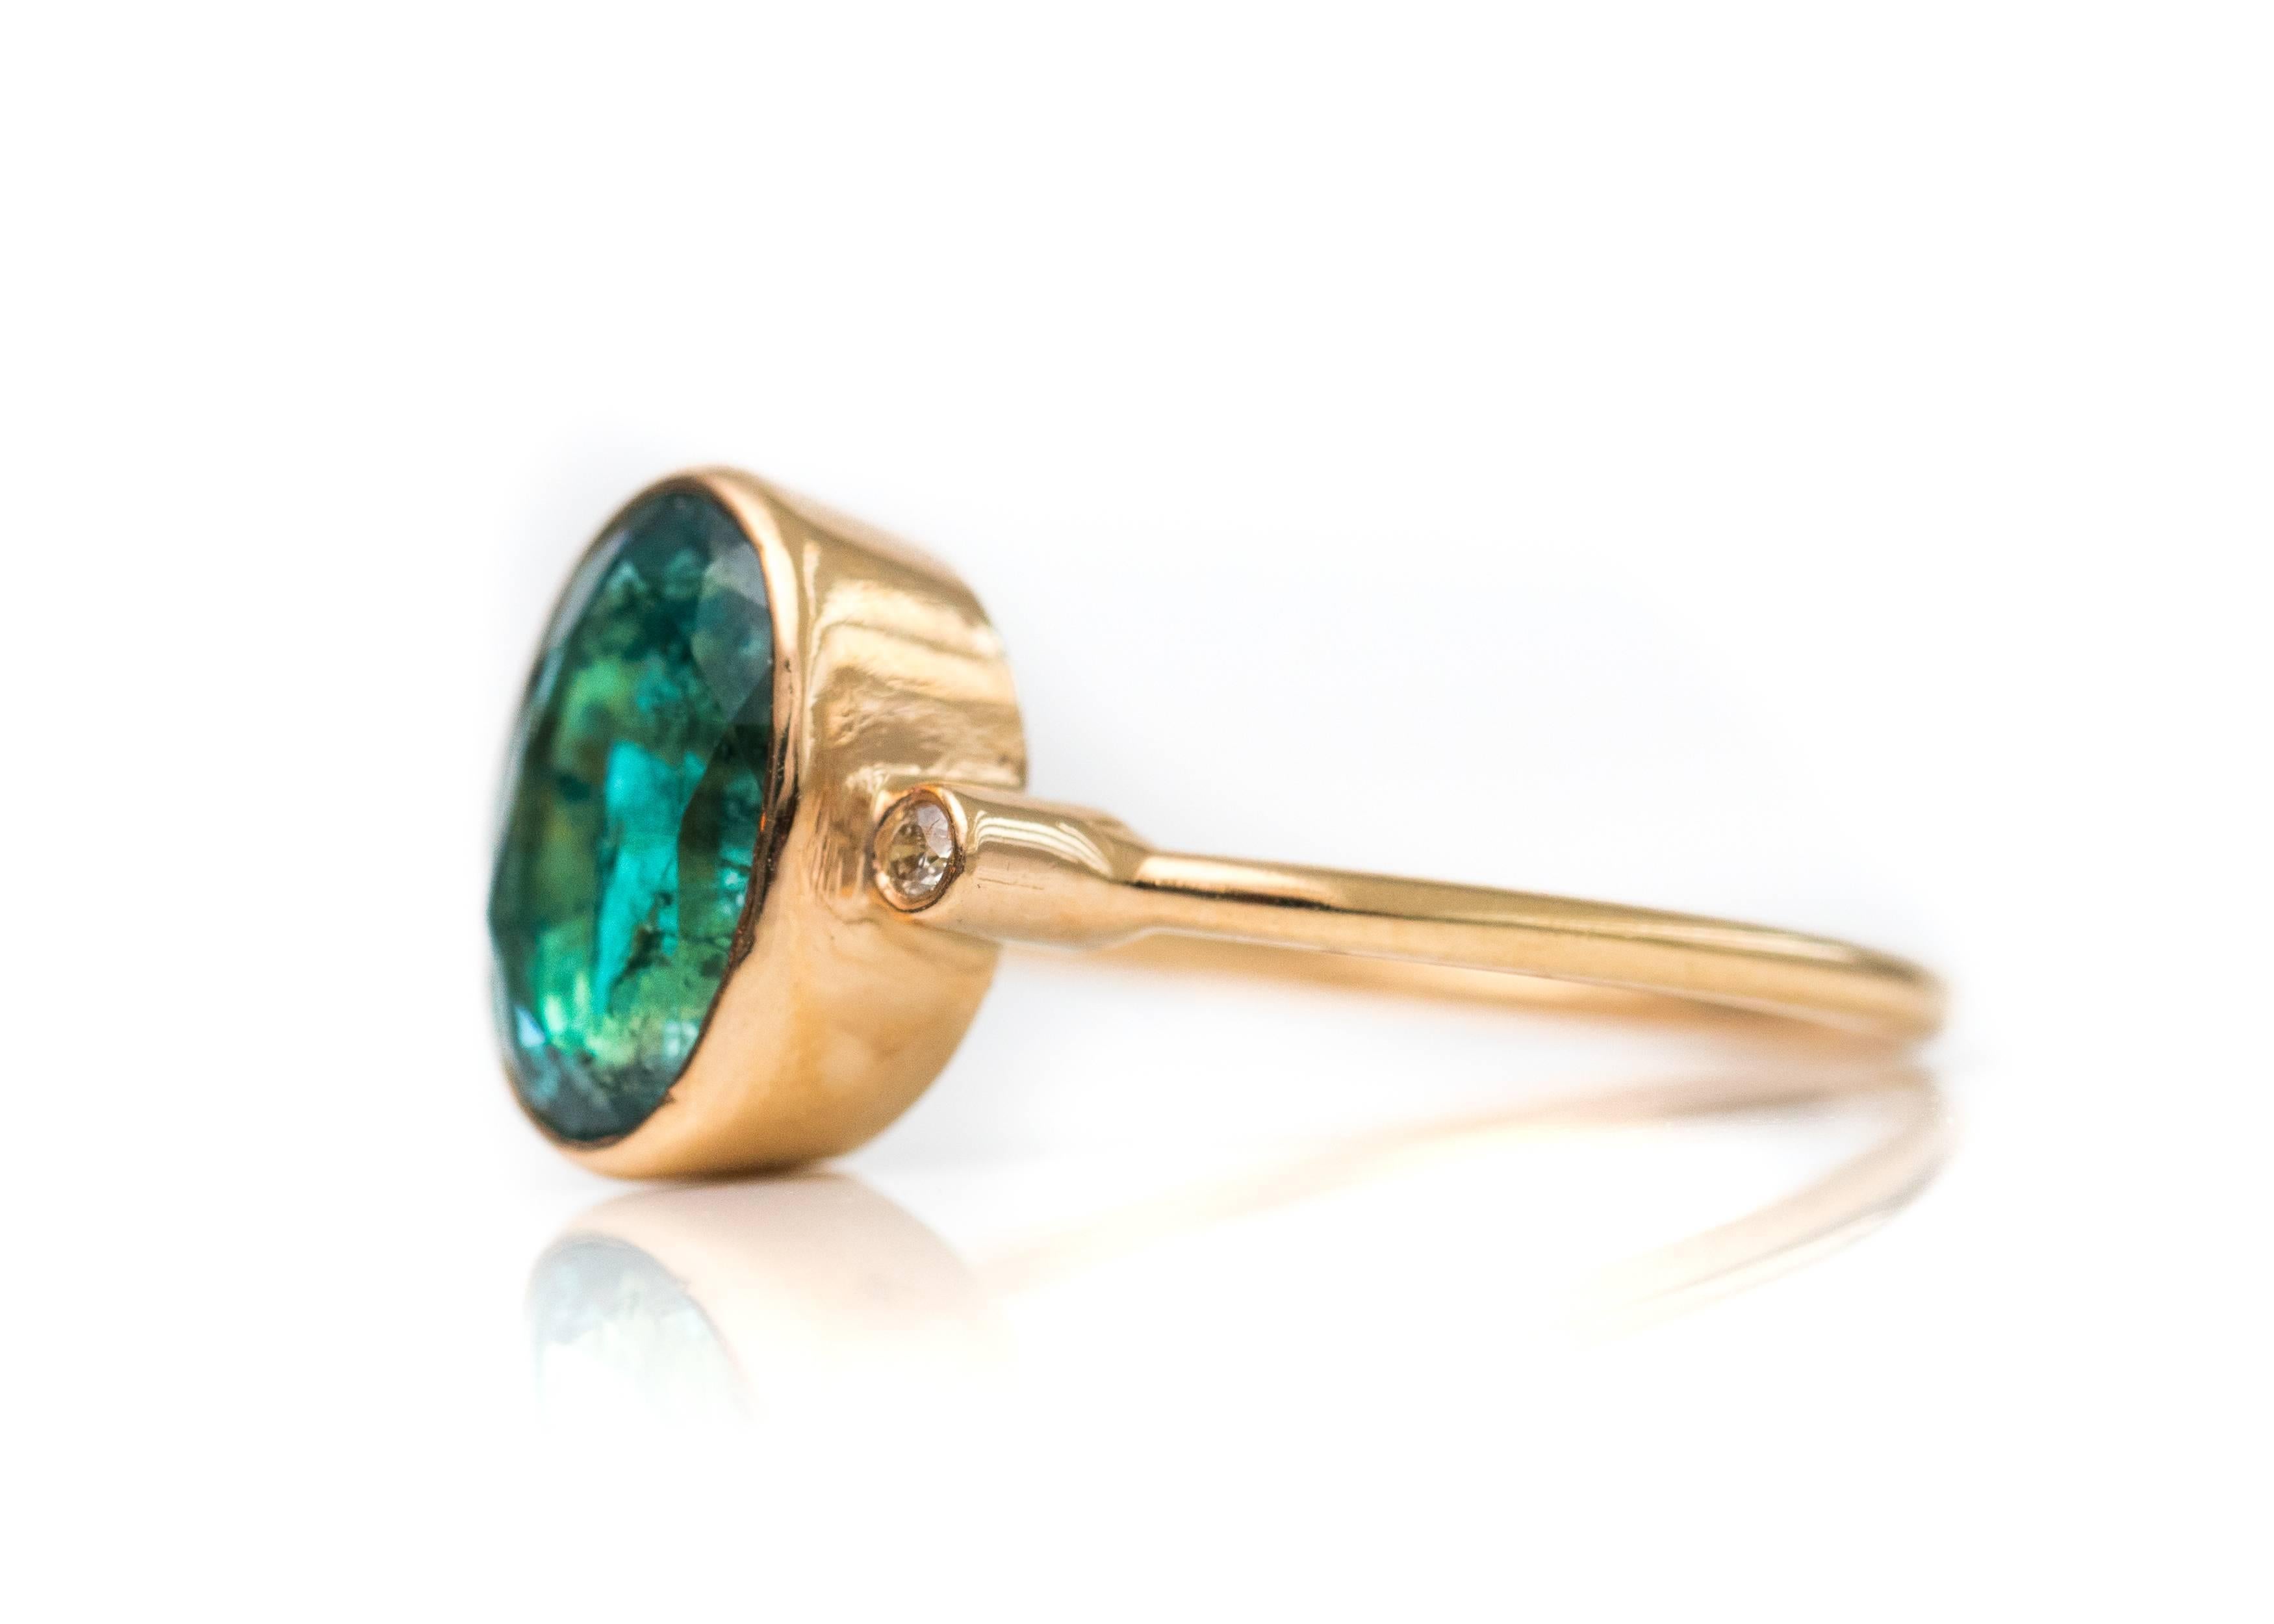 1.8 Carat South American Emerald with Diamonds and 18 Karat Yellow Gold Ring

Features a 1.8 carat deep blue South American Emerald center stone, Round Brilliant Diamonds and 18 Karat Yellow Gold. The stunning Oval Emerald center stone is bezel set